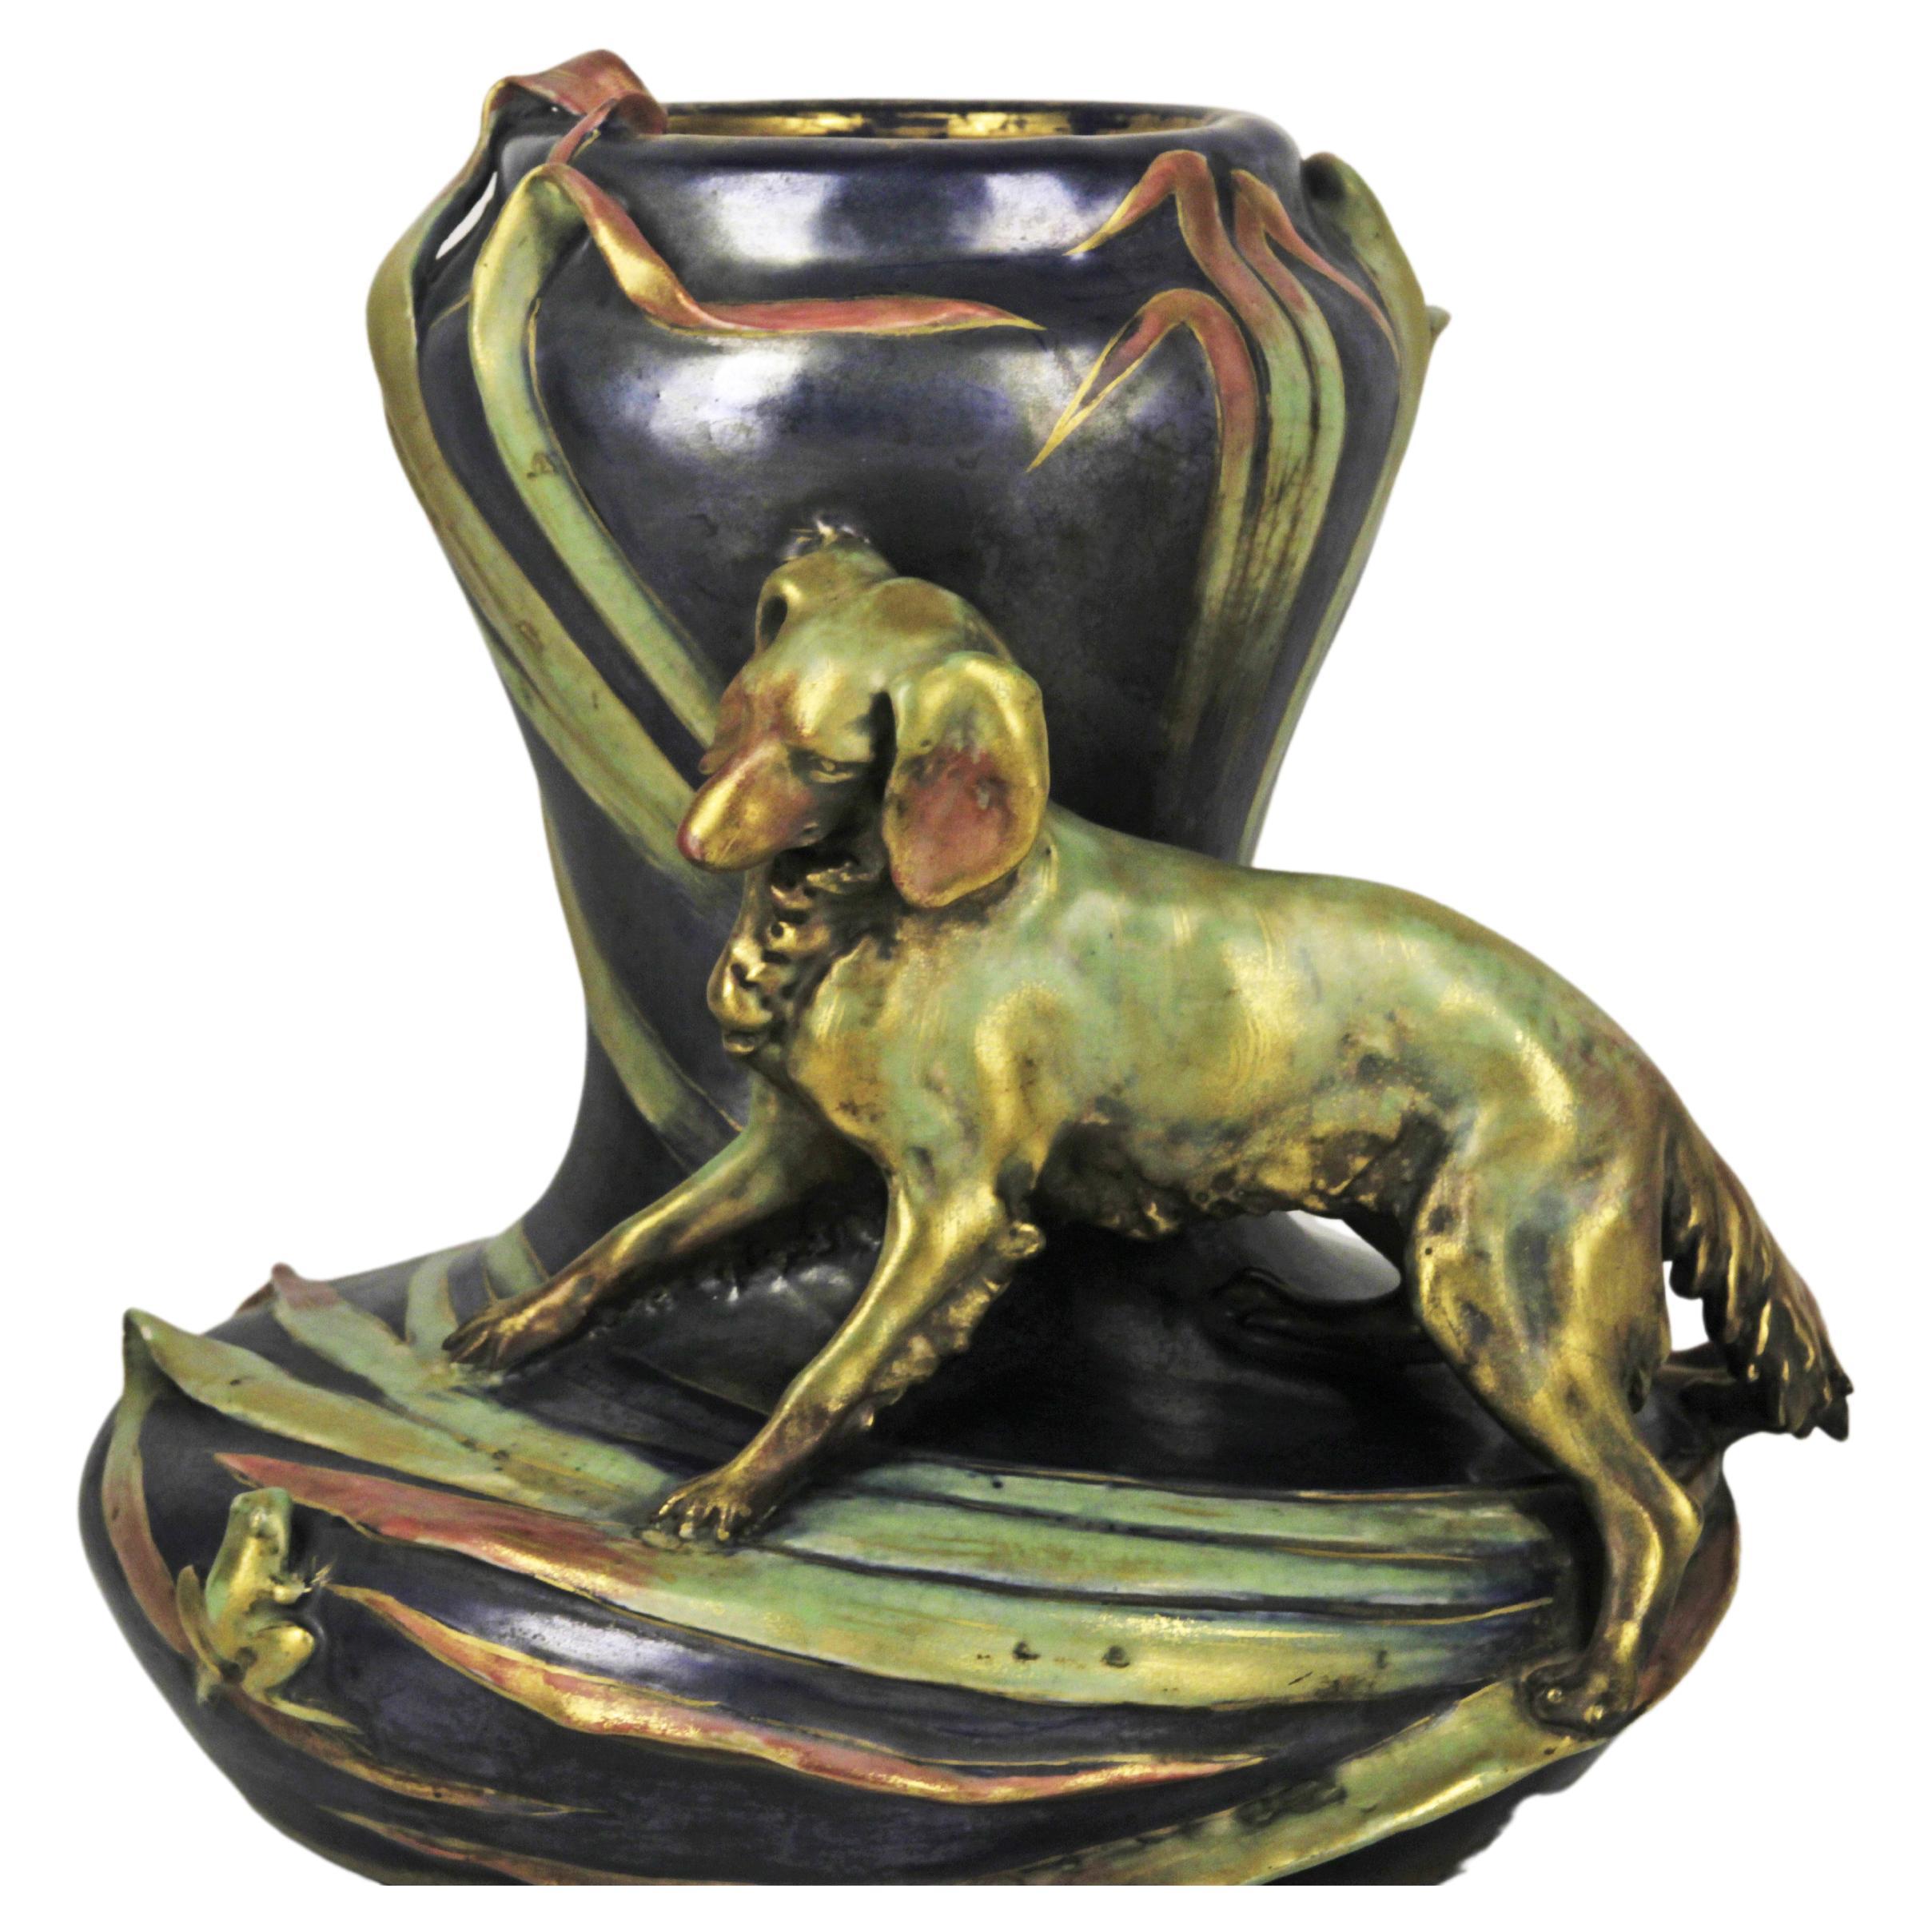 Art nouveau style ceramic vase Eduard Stellmacher
Glazed ceramic (glazed) with iridescent details
hunting dog and frog
Colors Green, Blue and Yellow
Origin Austria Circa 1900
Amphora Manufacture
Very good condition (small perforation on one side of